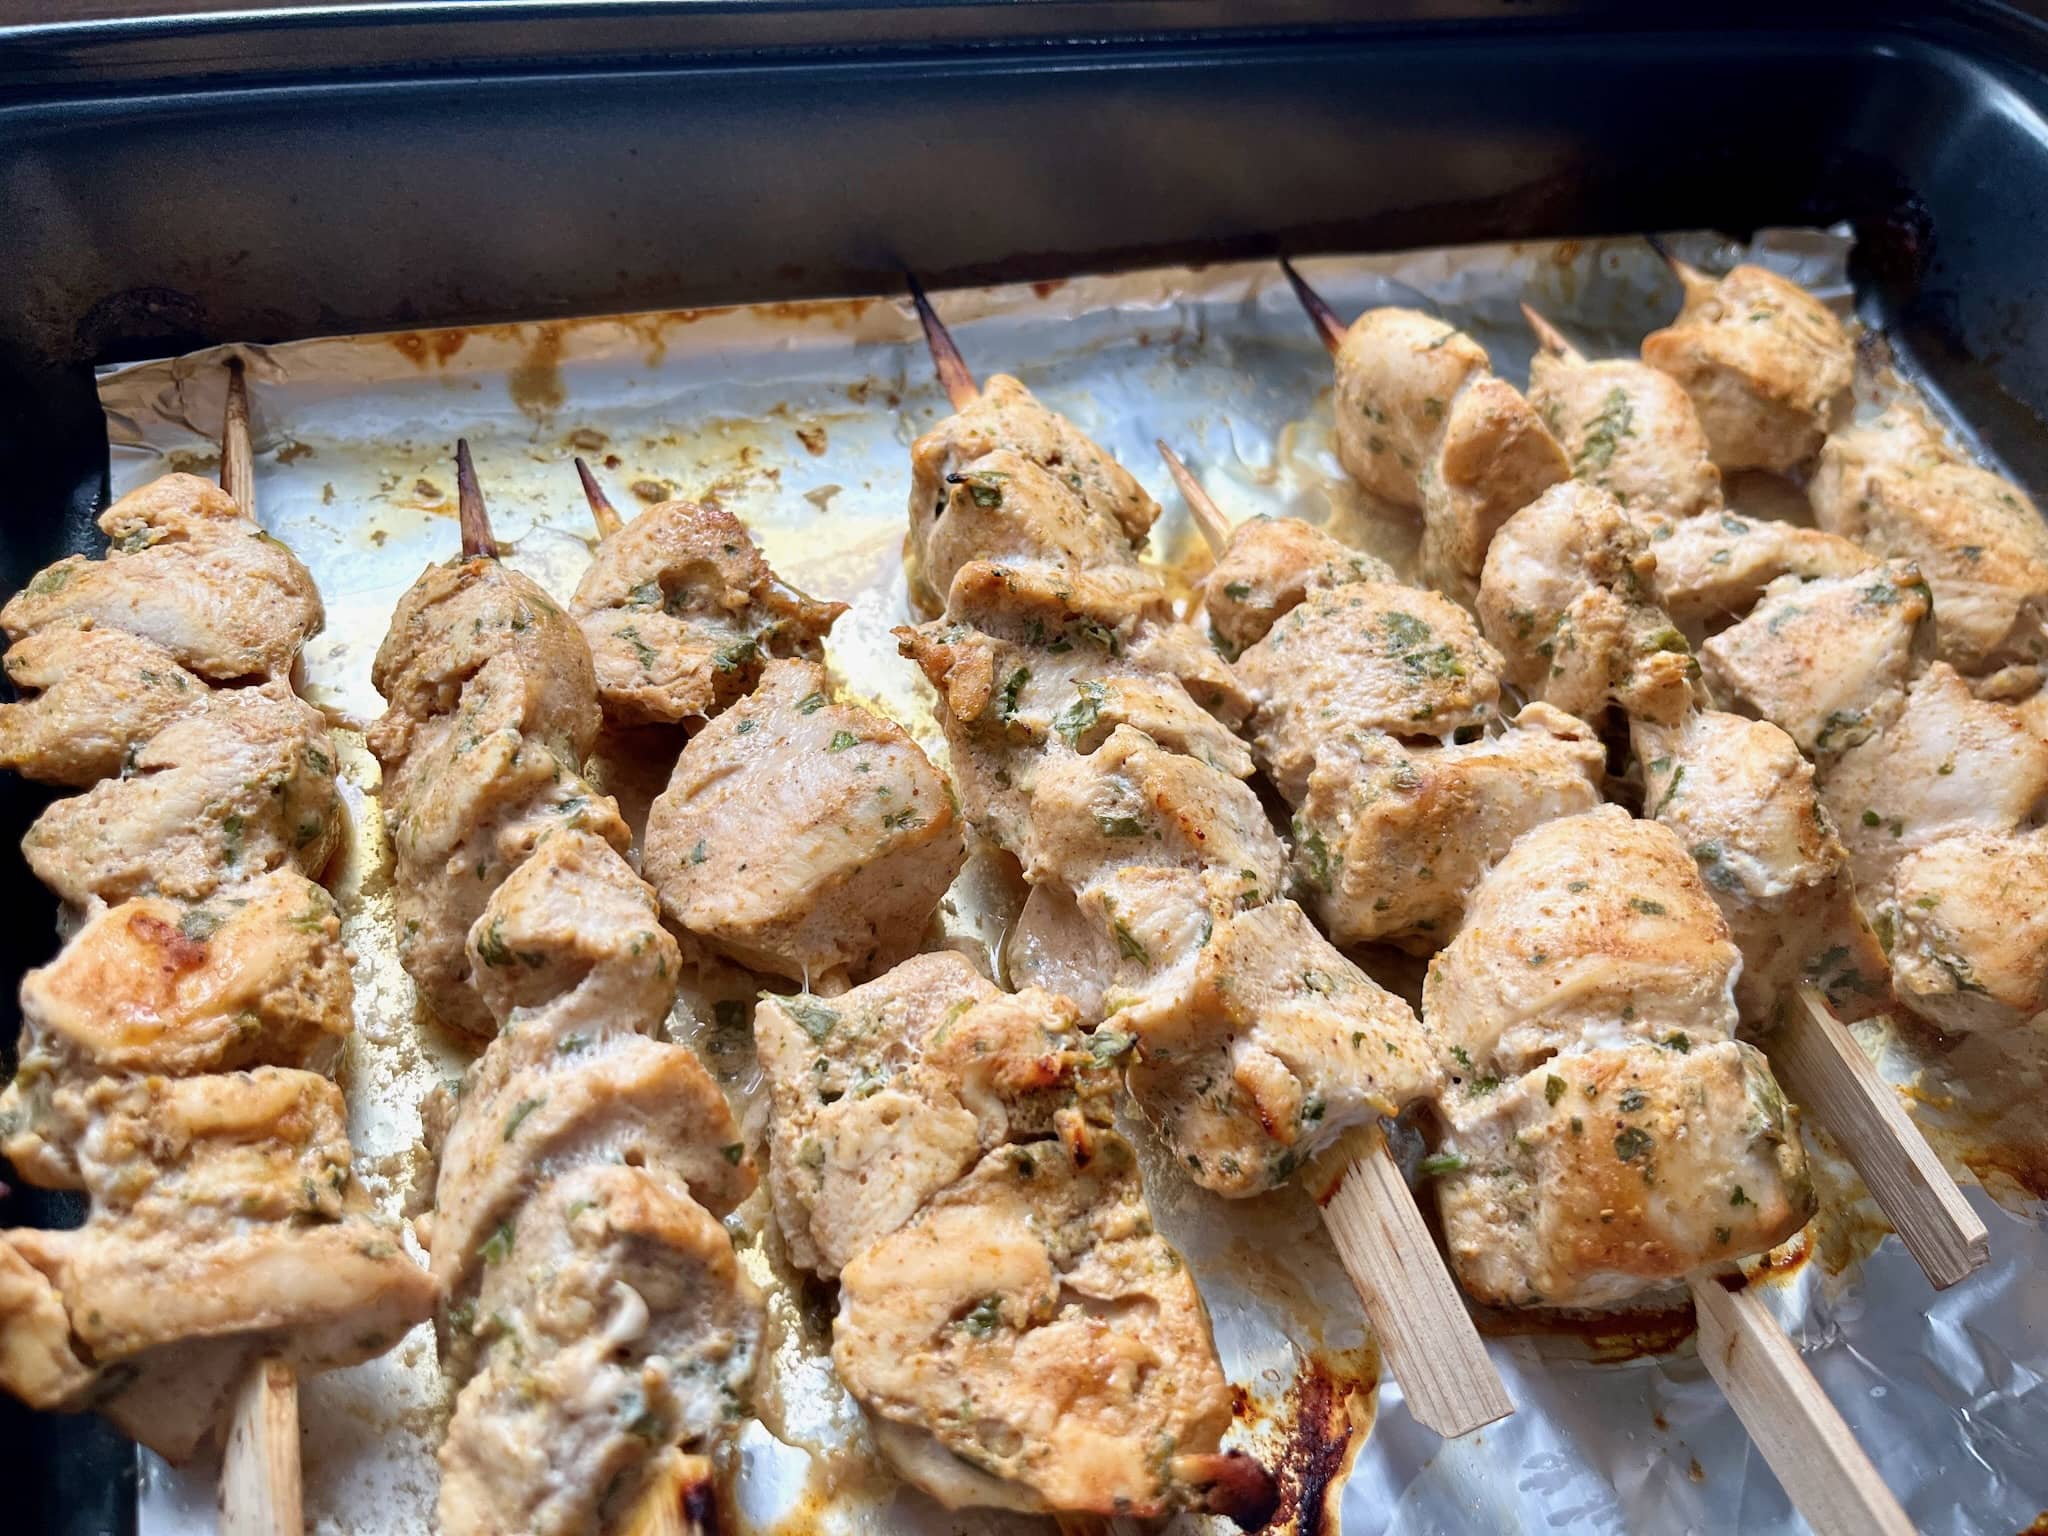 Nicely baked chicken curry skewers, still on in a baking tray